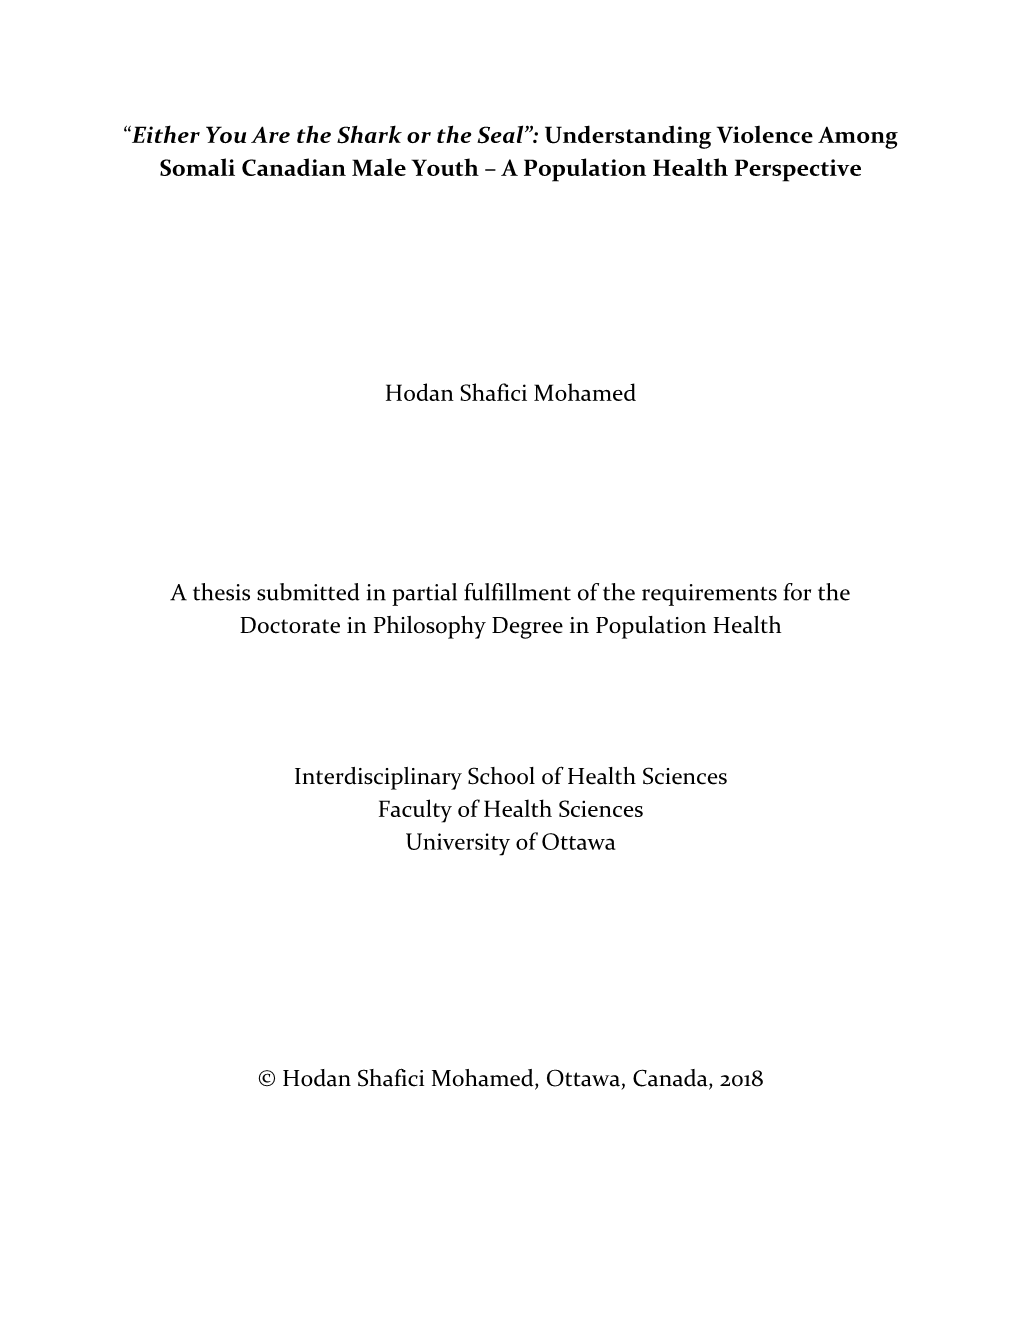 Understanding Violence Among Somali Canadian Male Youth – a Population Health Perspective